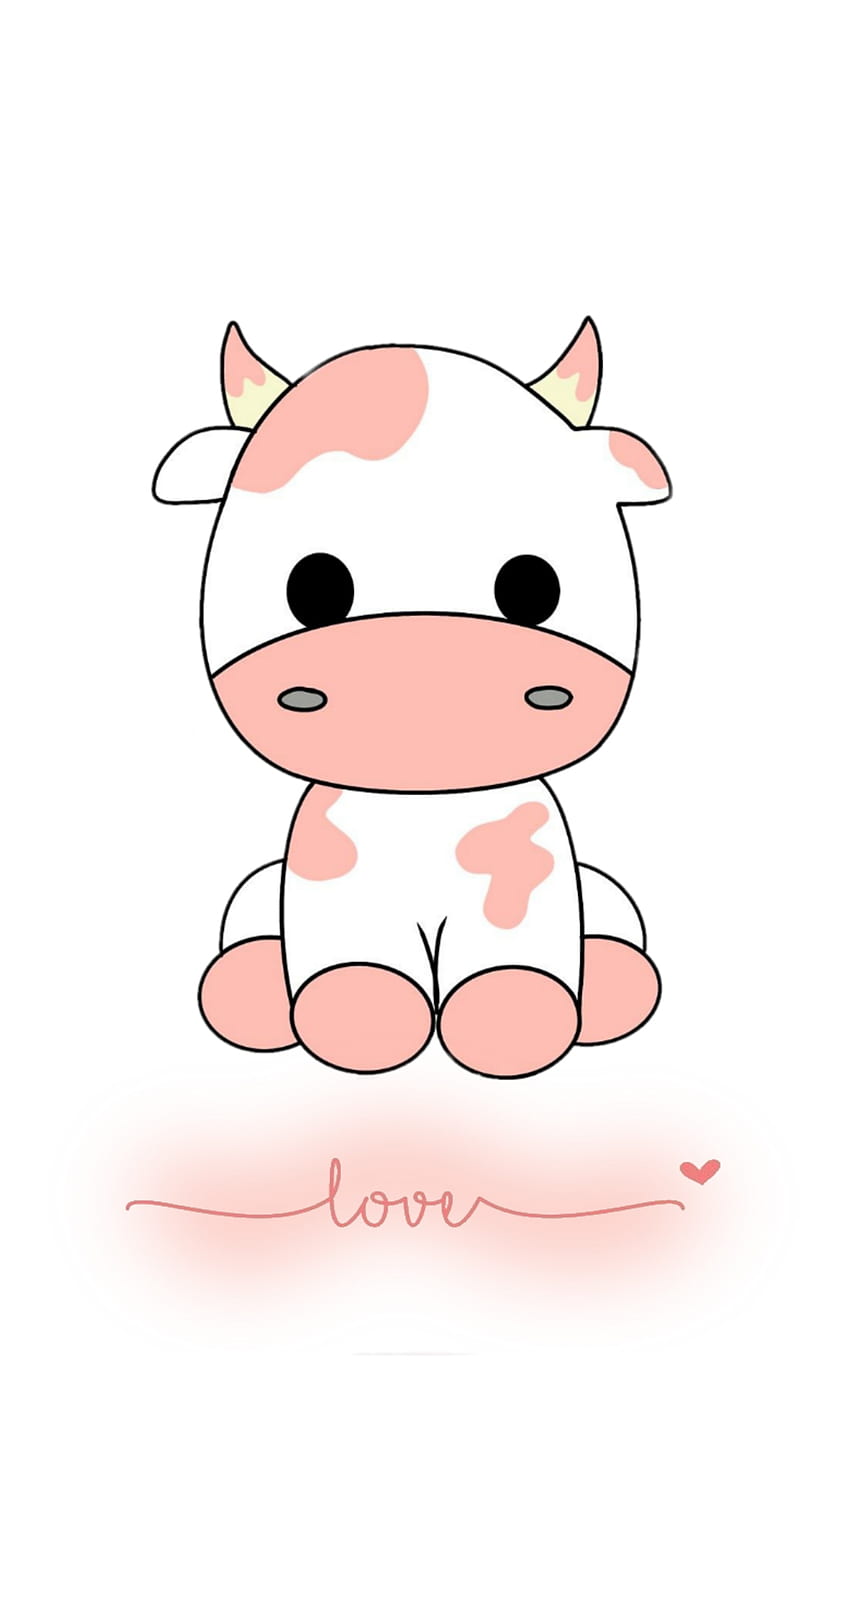 Aesthetic Wallpapers on Twitter Pink strawberry cow themed wallpaper  wallpaper pink strawberry cute strawberrycow httpstcocboT9K5s6o   Twitter